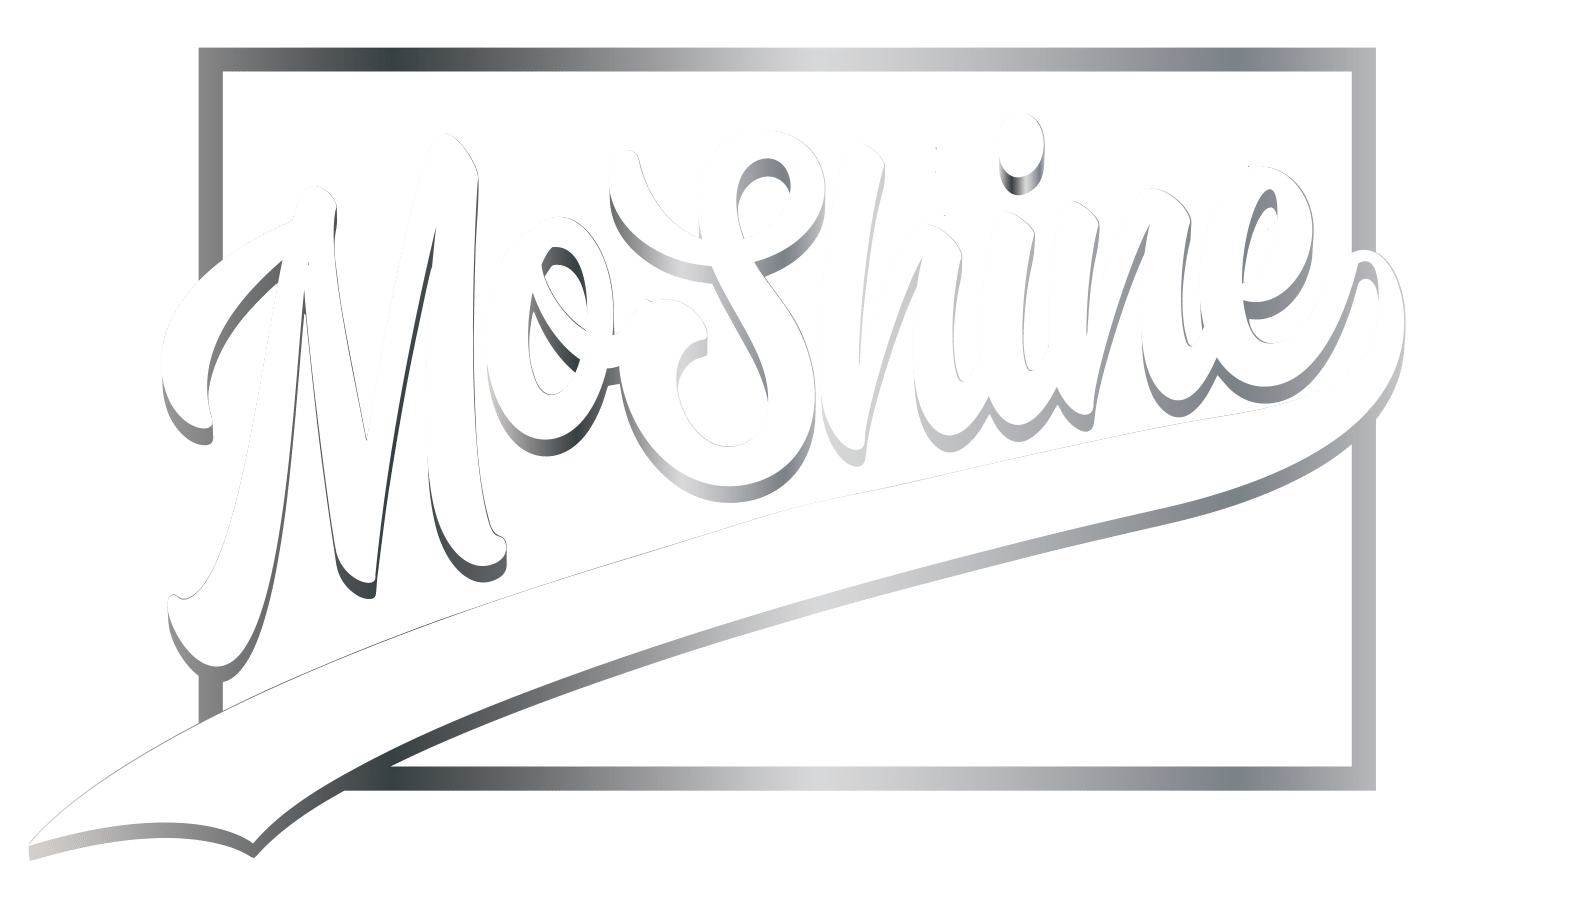 MoShine™ - The Ultimate Party Drink by Music Icon Nelly